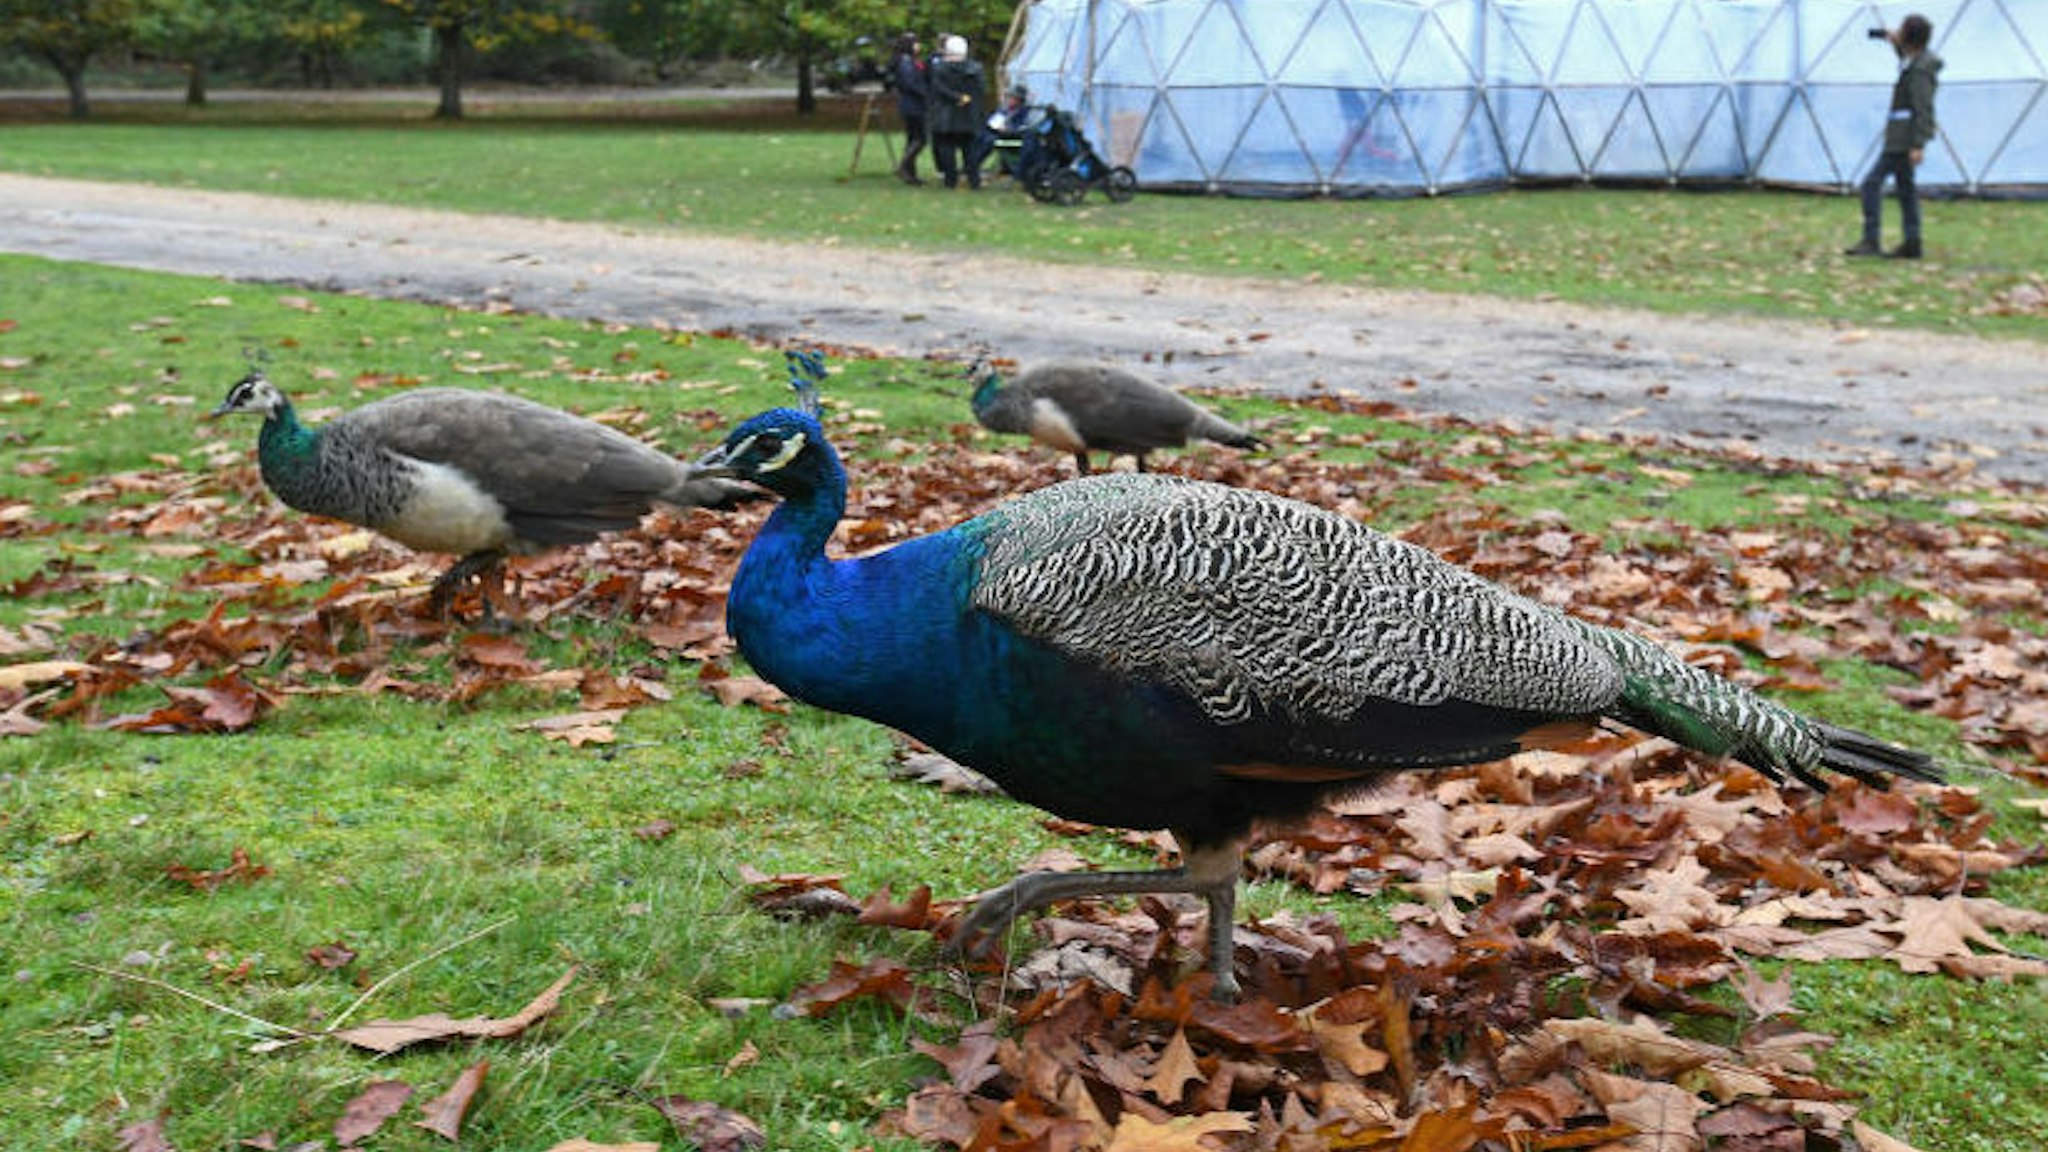 POOLE, ENGLAND - OCTOBER 25: Peacocks graze near an art installation of Pollution Pods by British artist Michael Pinsky are displayed at Brownsea Island on October 25, 2019 in Poole, England. The installation is made up of five geodesic domes, emulating different polluted environments in the cities of Tautra in Norway, London, New Delhi, Beijing and Sao Paulo in Brazil. (